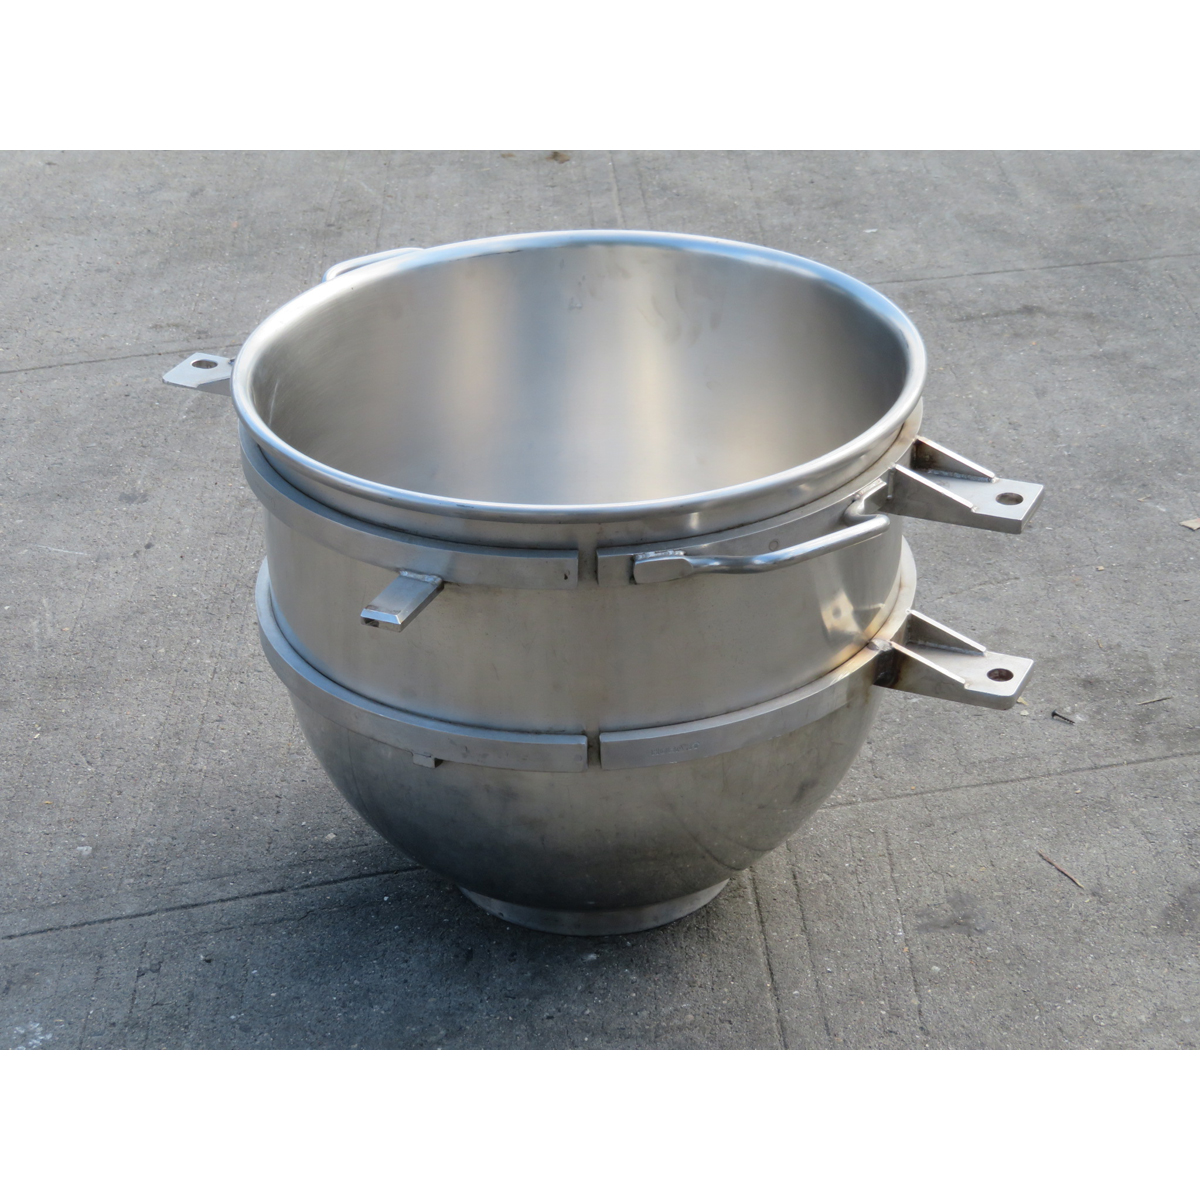 Hobart Legacy BOWL-HL80 80 Qt. Stainless Steel Bowl for HL800 Mixer, Used Excellent Condition image 1